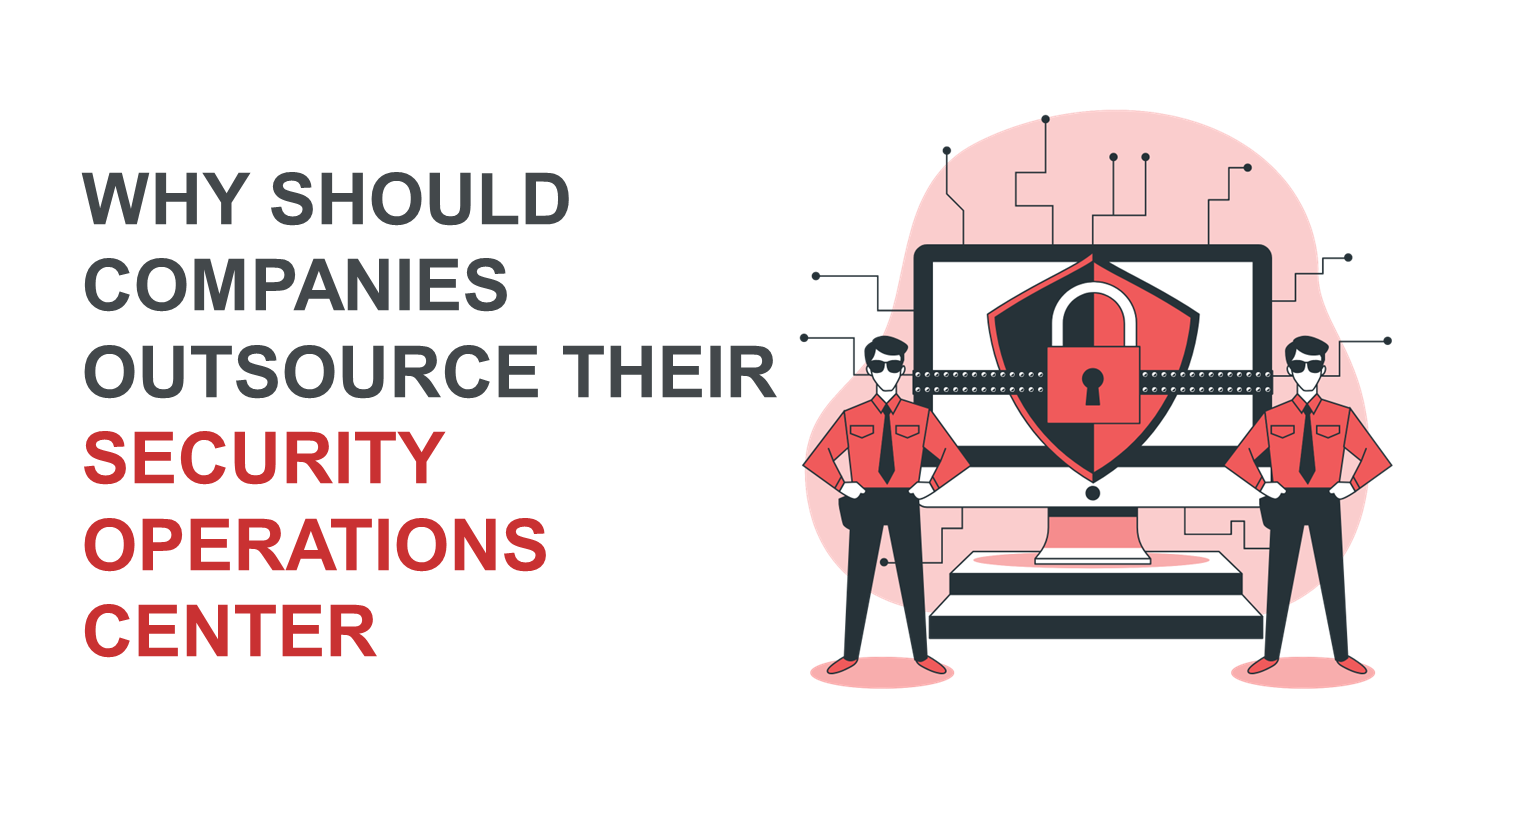 Why Should Companies Outsource Their Security Operations Center